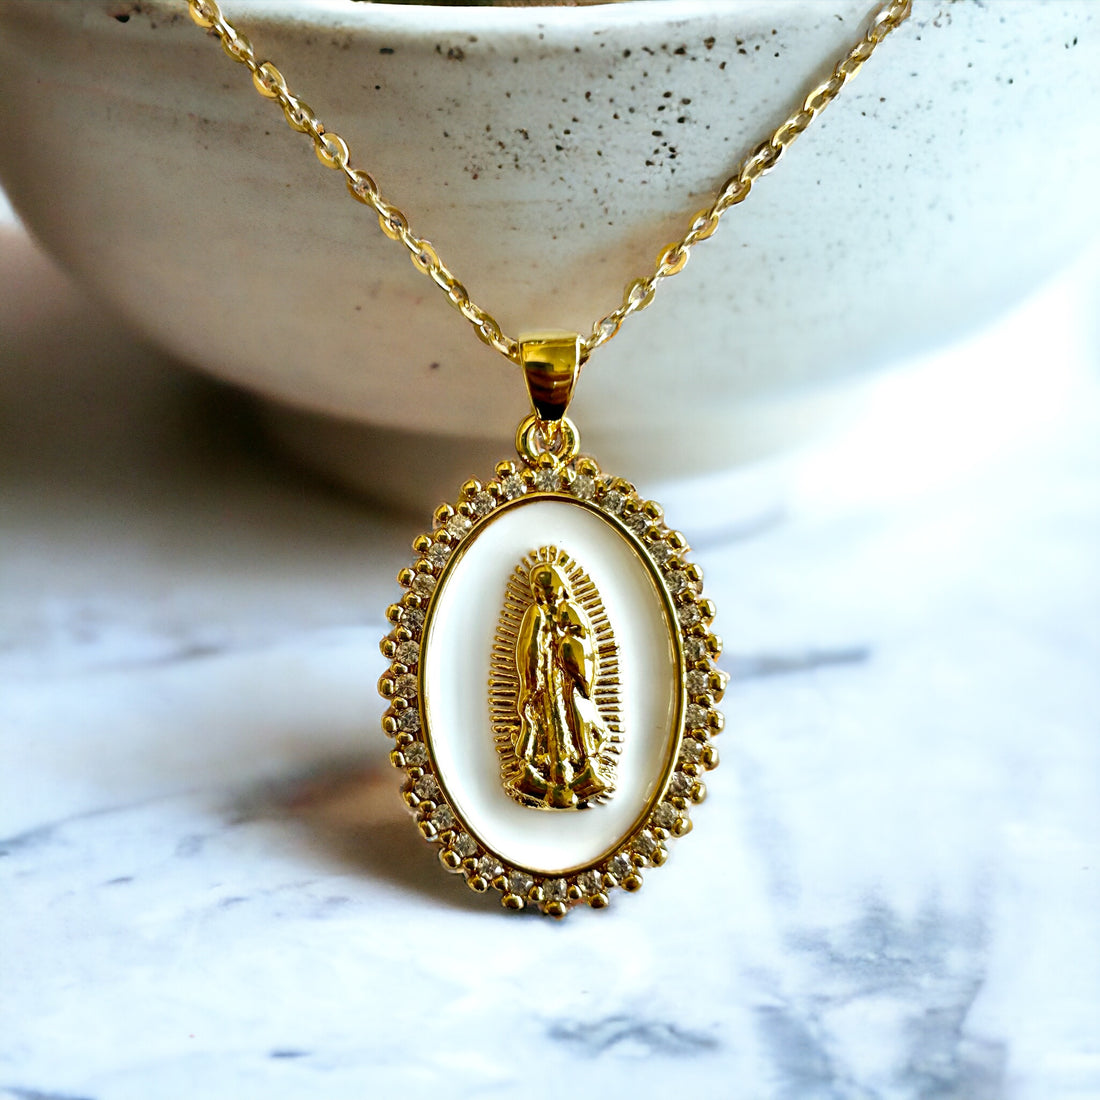 dainty cross necklace, gold cross necklace, religious necklace, gold necklace, christian jewelry, catholic jewelry, christian gifts, catholic gifts, catholic gift for her, first communion gift, baptism gift, wedding gift, christian wedding, bridesmade gift, virgin mary necklace, guadalupe necklace, catholic jewelry